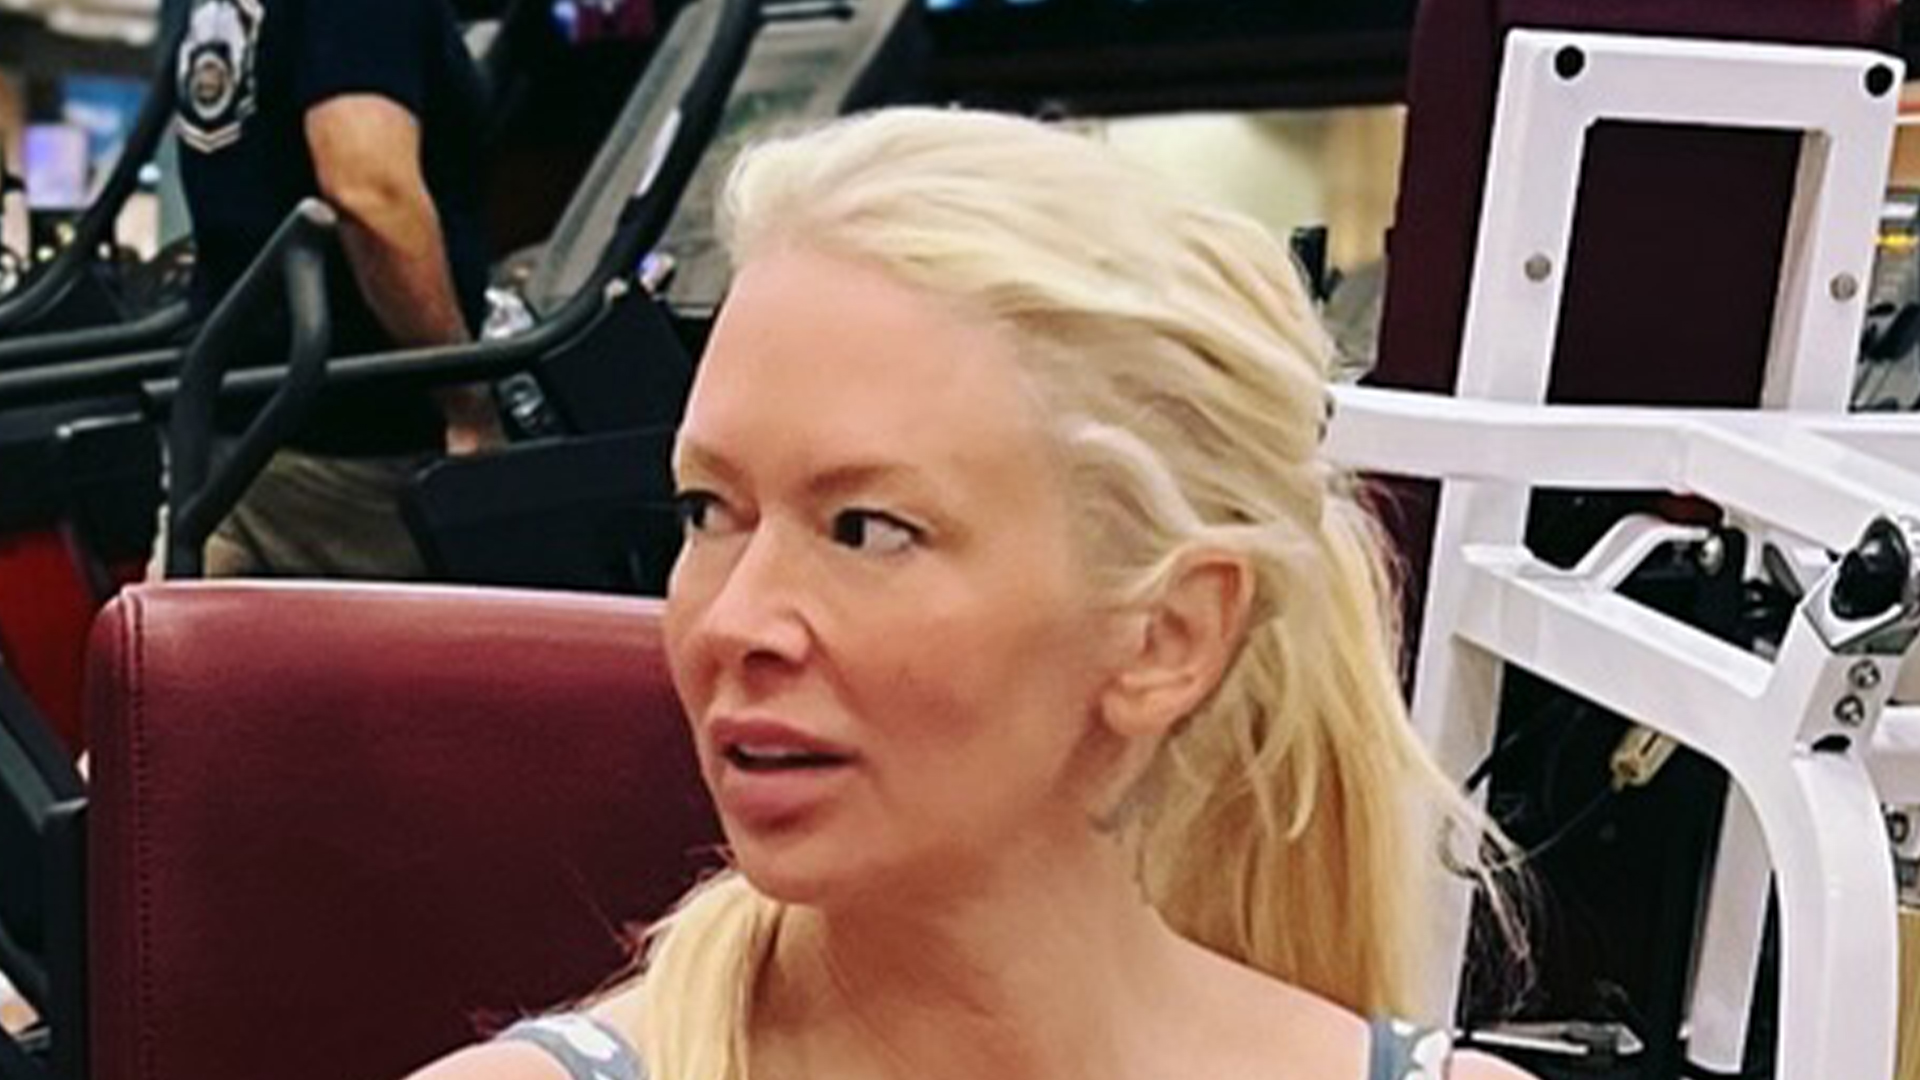 Jenna Jameson flaunts new full-body photos in crop top and jeans after star’s major weight-loss transformation